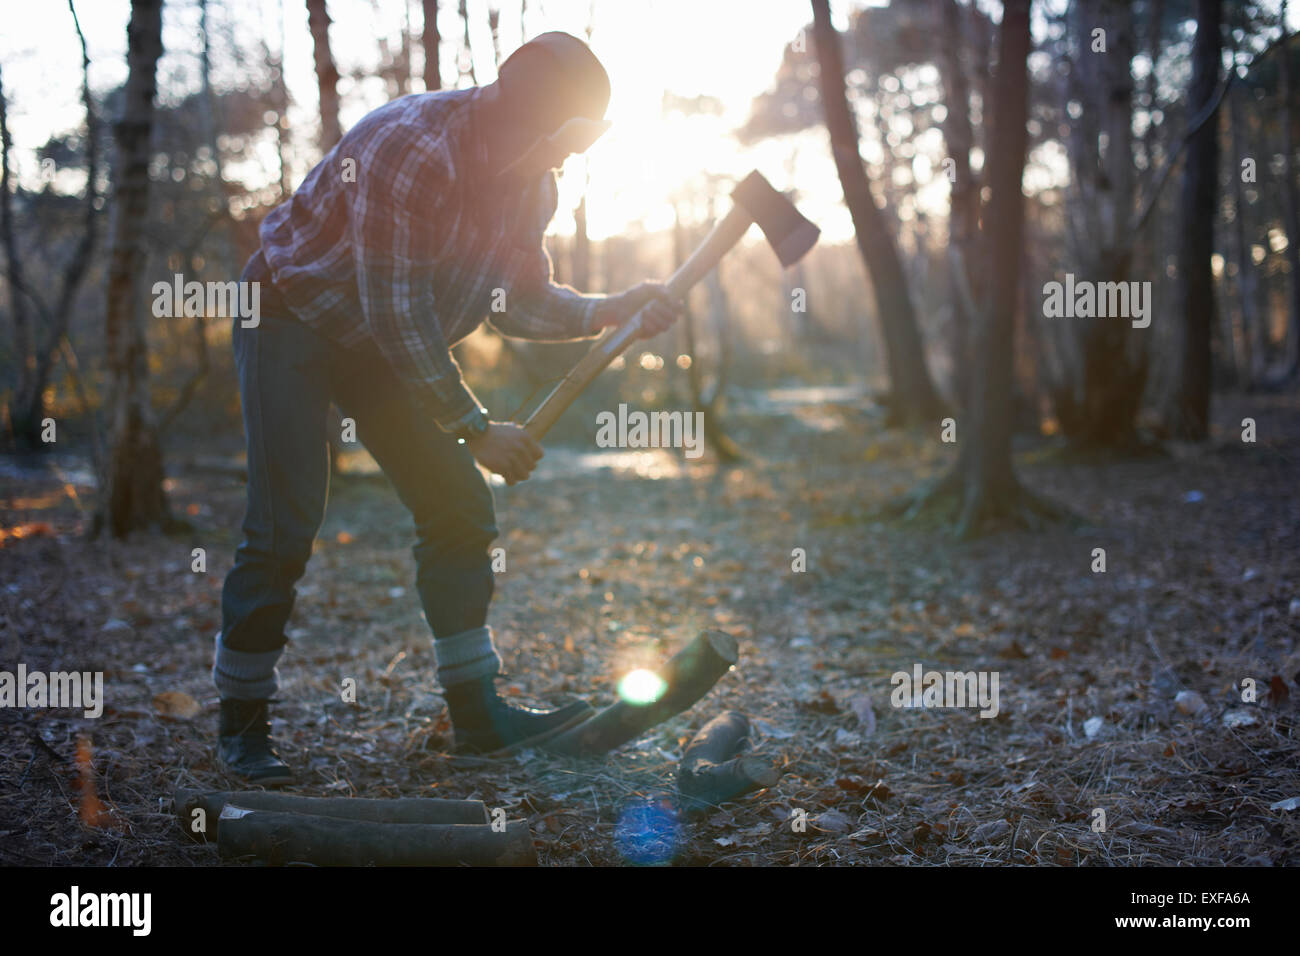 Mature male backpacker chopping logs for campfire in forest Stock Photo